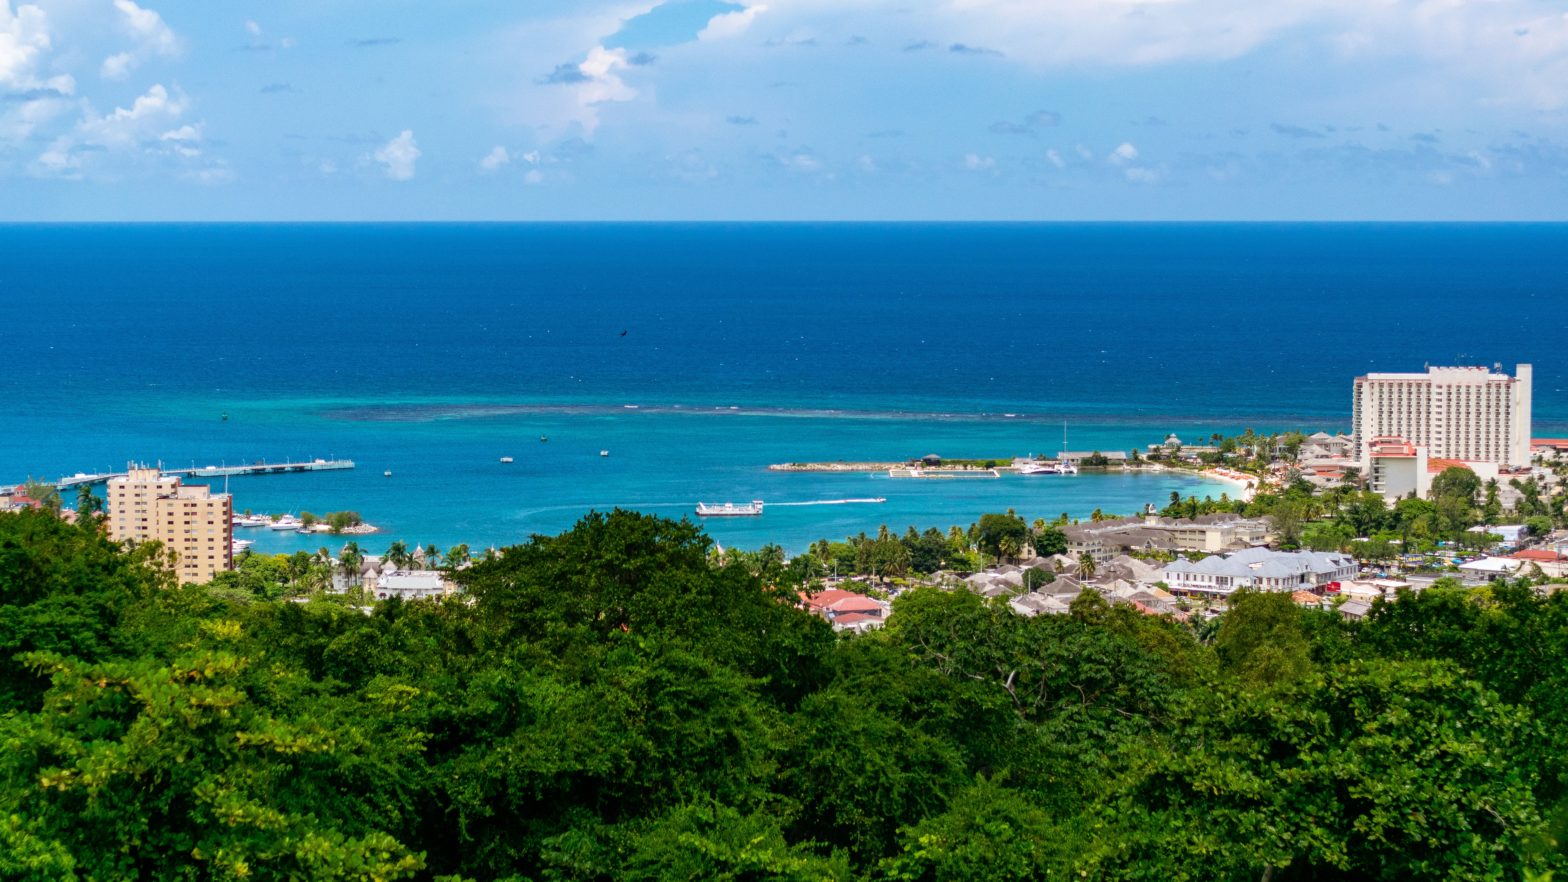 American Airlines Will Be First US Airline To Offer Service To Ocho Rios, Jamaica In November